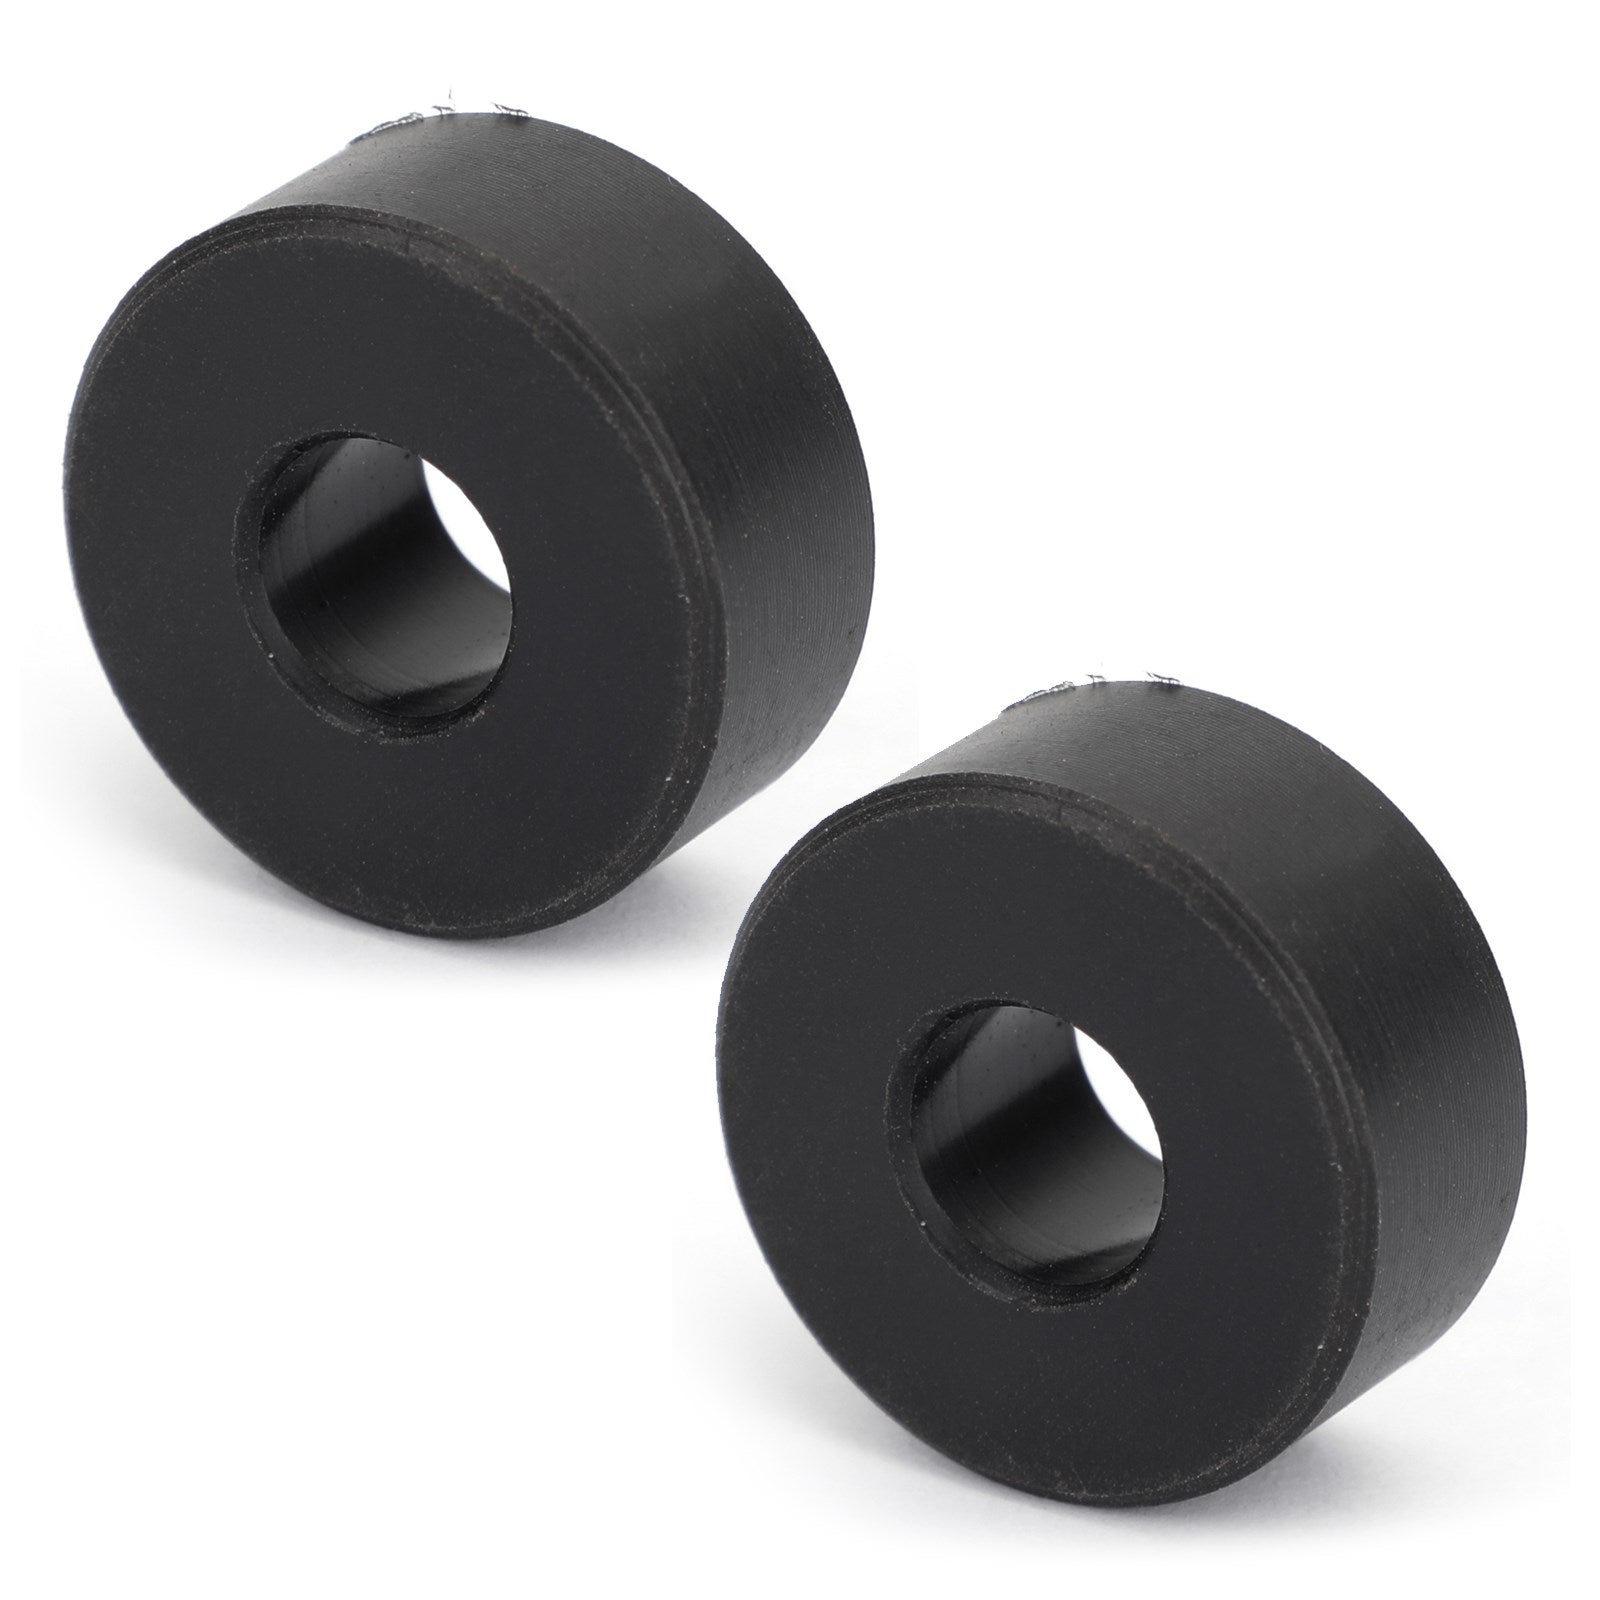 Pair Secondary Clutch Rollers for Polaris RZR Ranger ACE 570 900 2013-2019